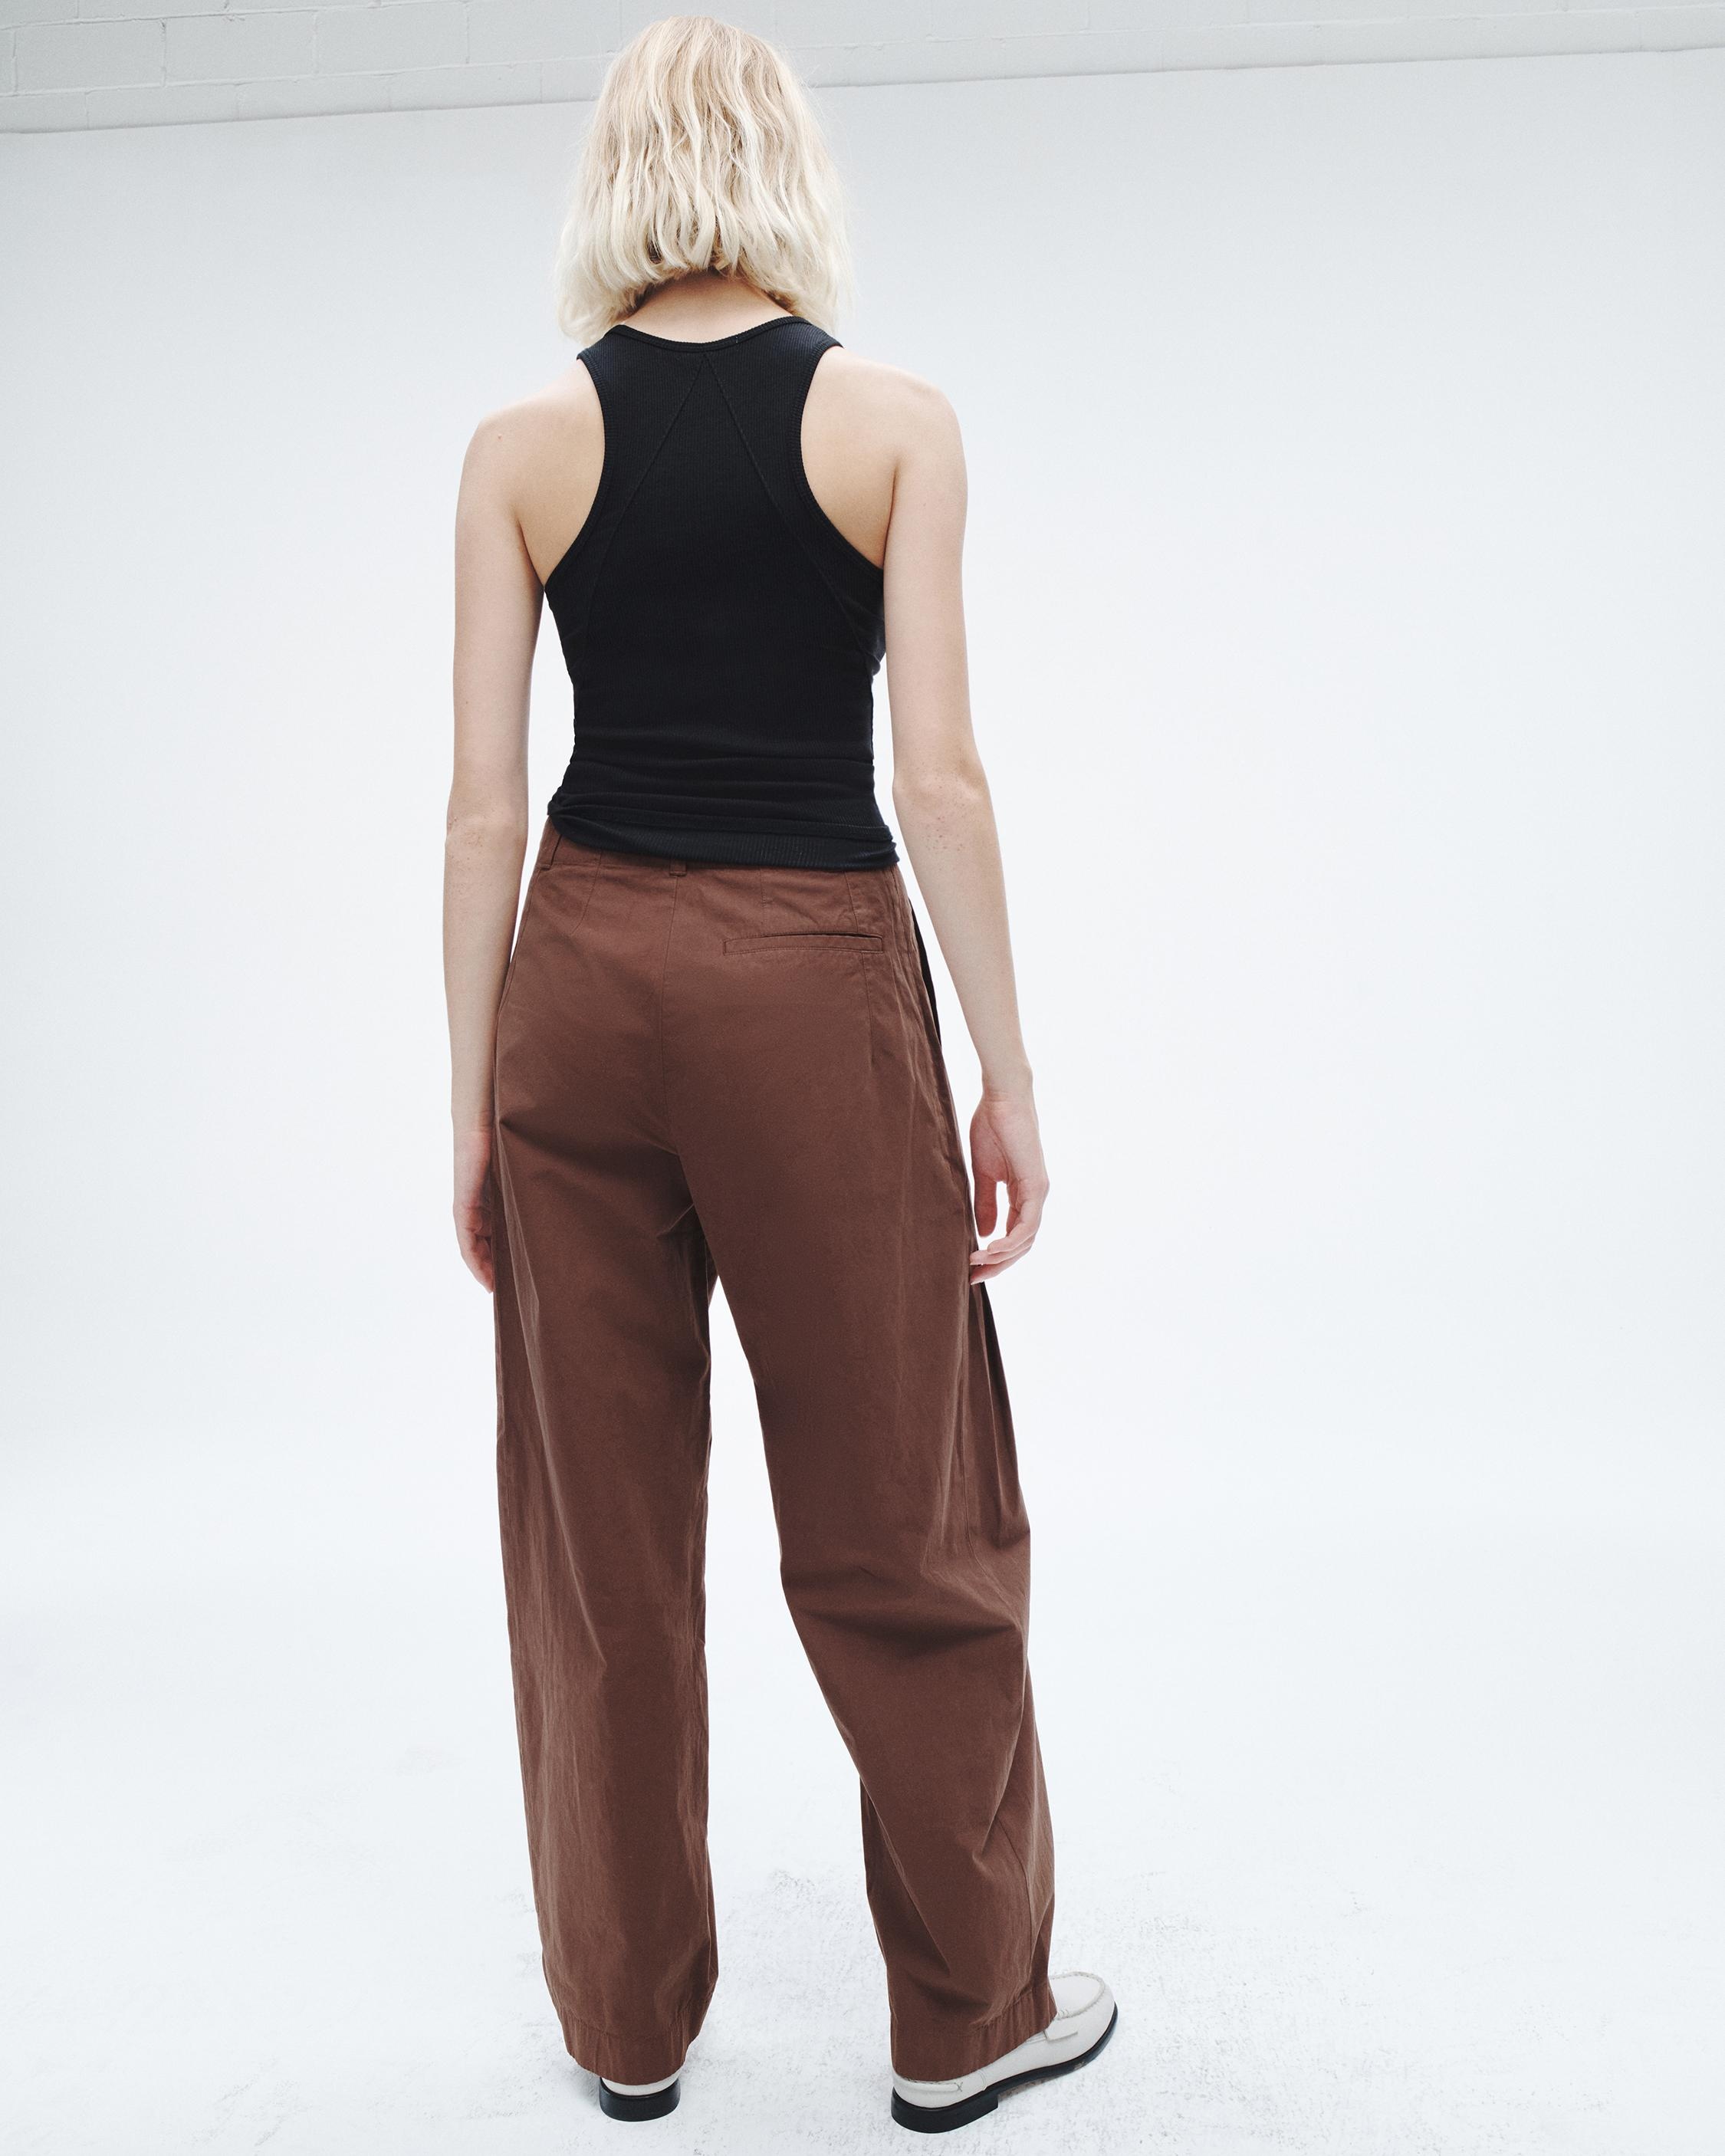 Donovan Cotton Pant
Relaxed Fit - 4